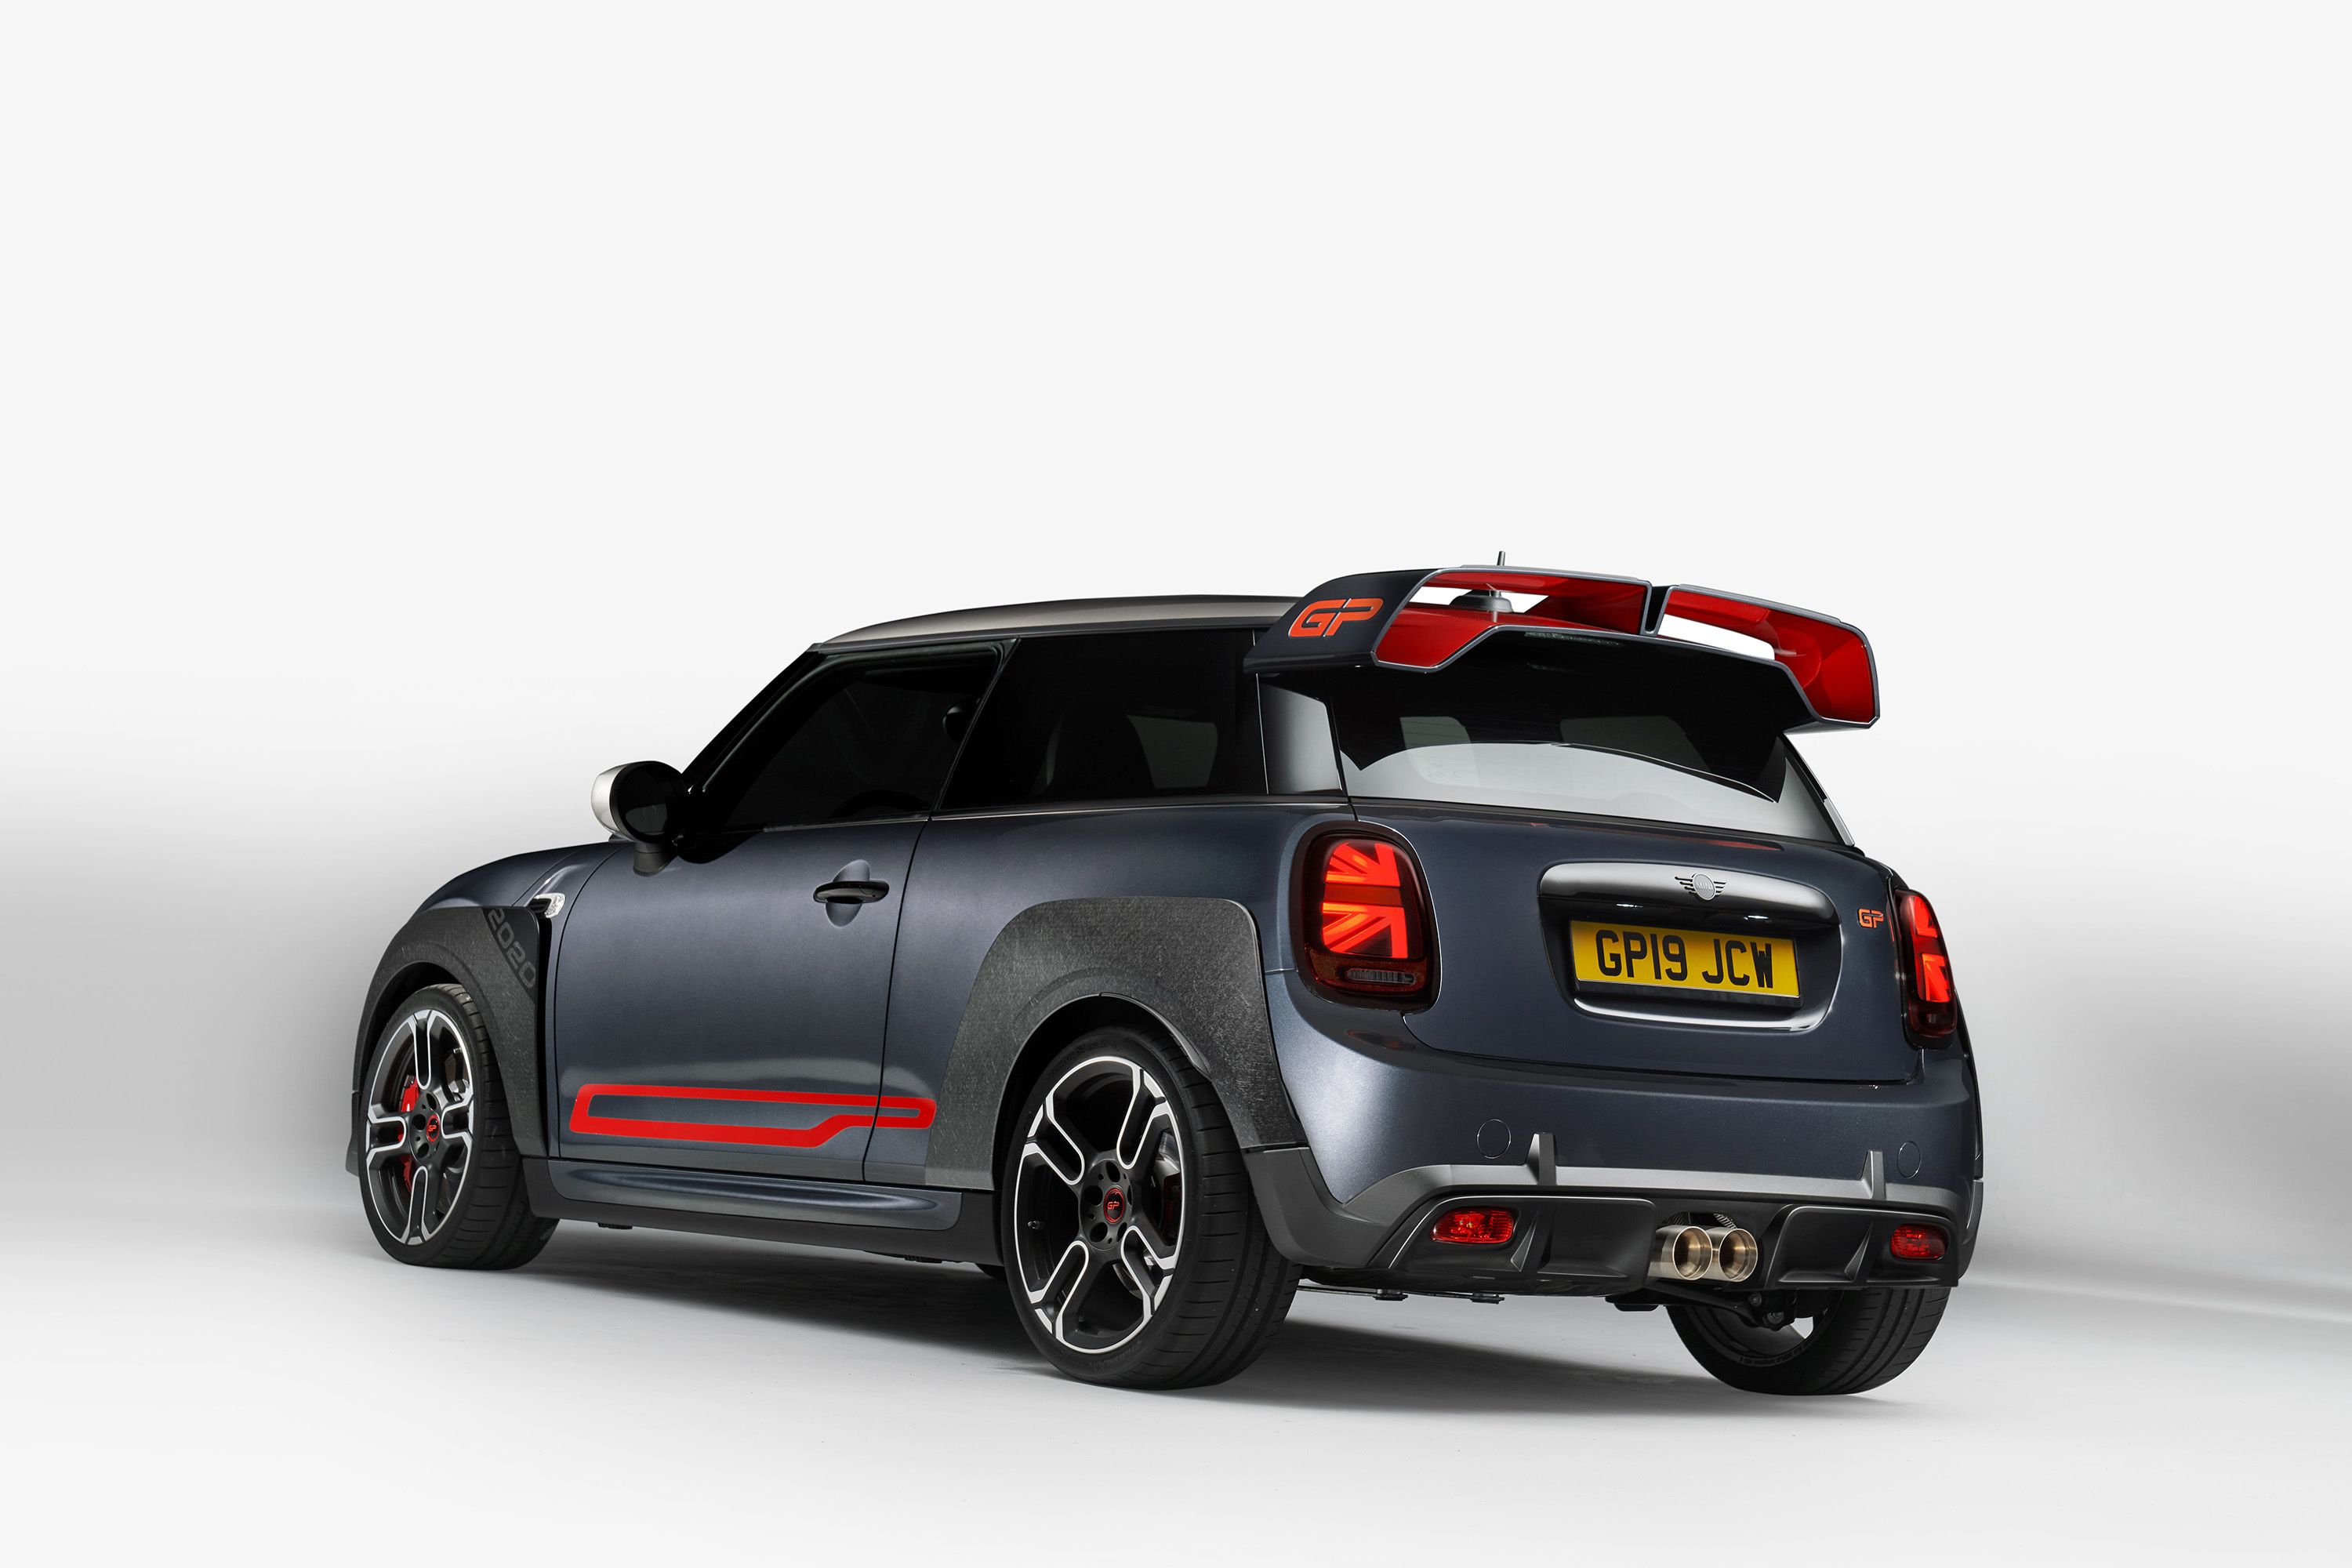 Mini Countryman Engines, Driving and Performance